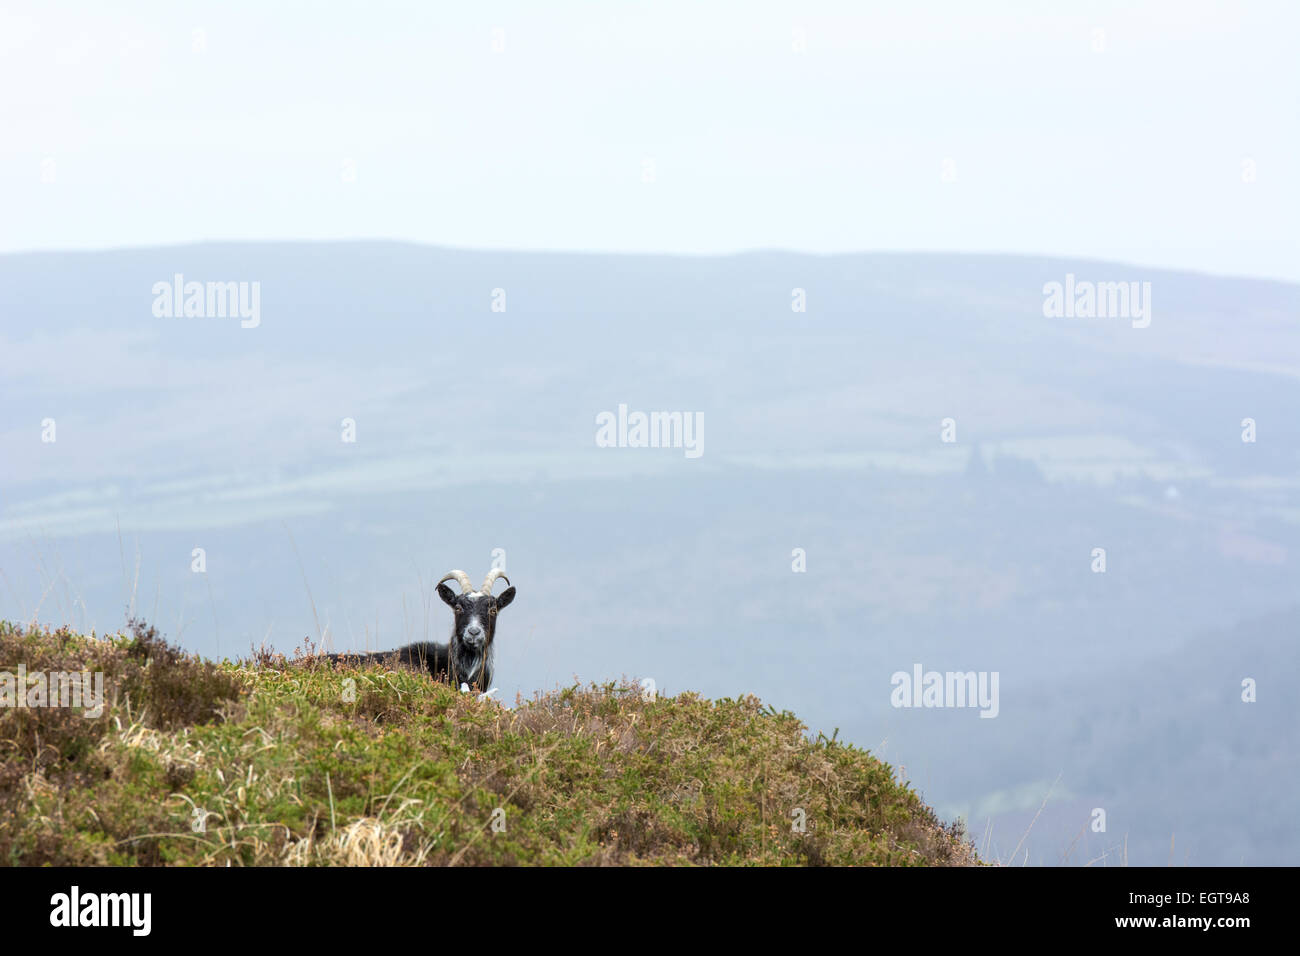 Wild mountain goat with horns high on hillside with hazy countryside in the background Stock Photo